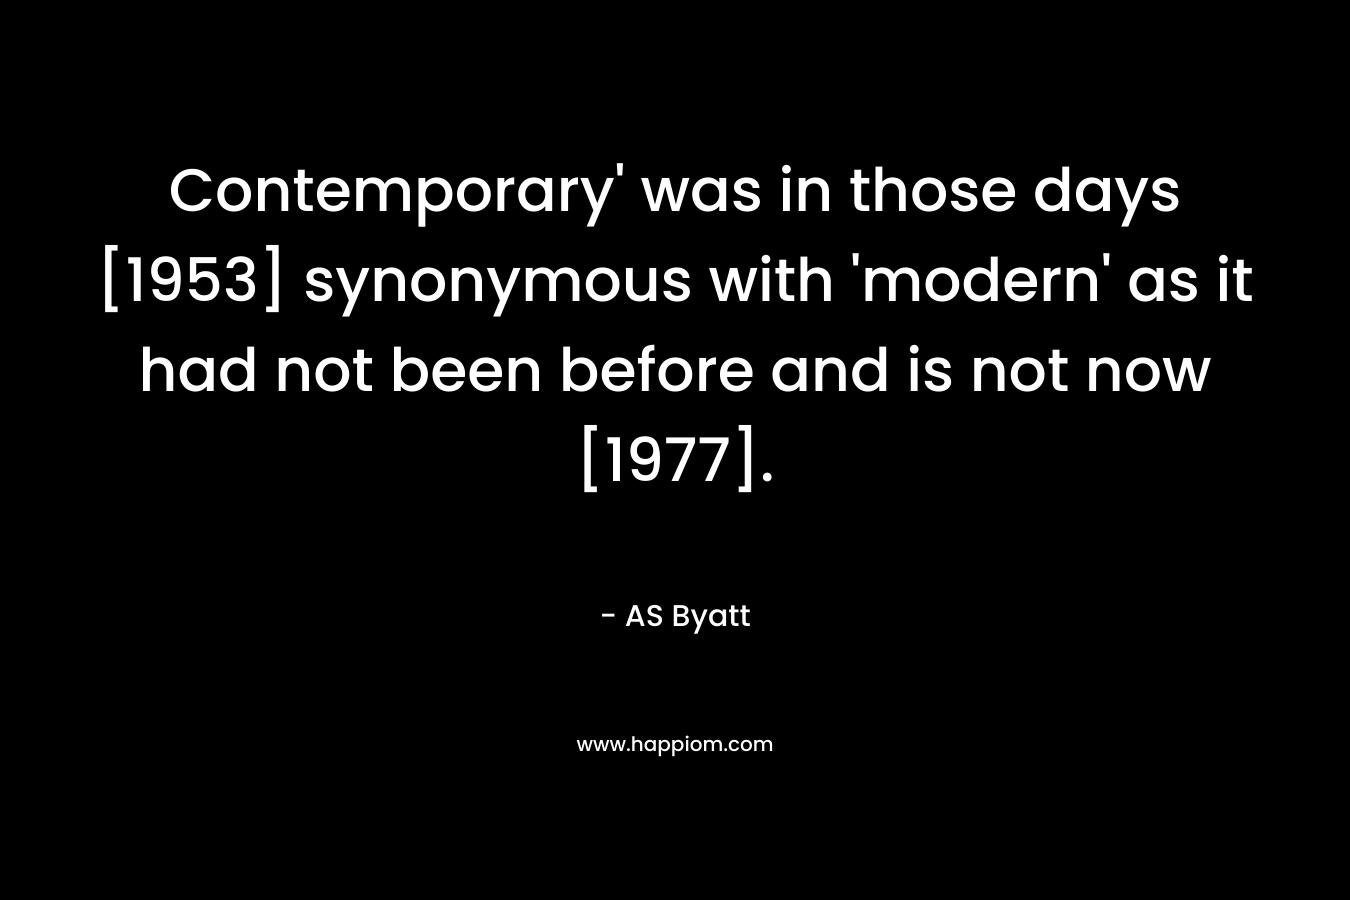 Contemporary' was in those days [1953] synonymous with 'modern' as it had not been before and is not now [1977].